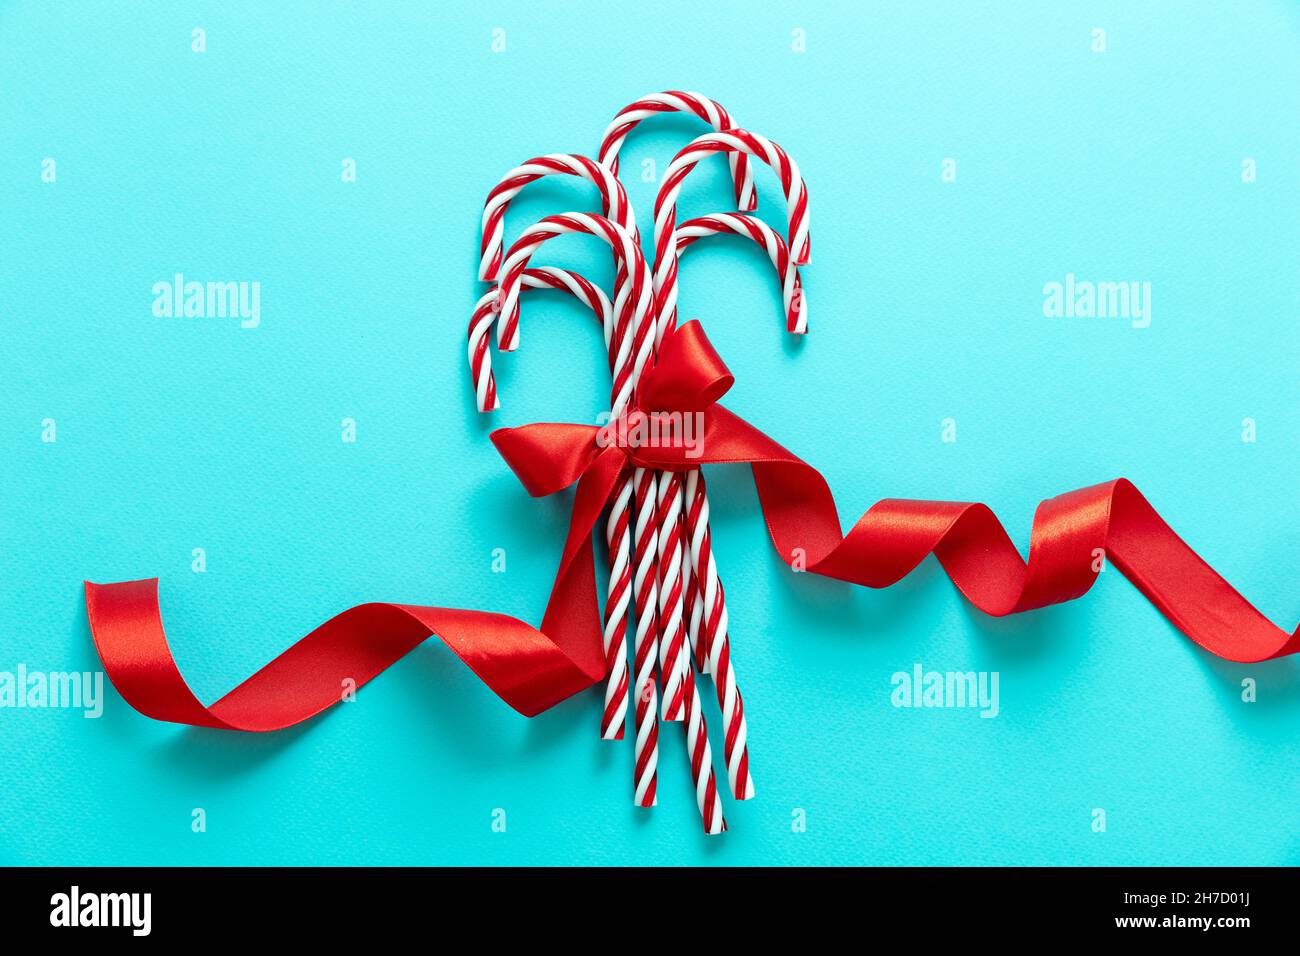 Candy canes bunch on blue background. Christmas peppermint red white candies with red ribbon bow. Merry Xmas greeting card template Stock Photo